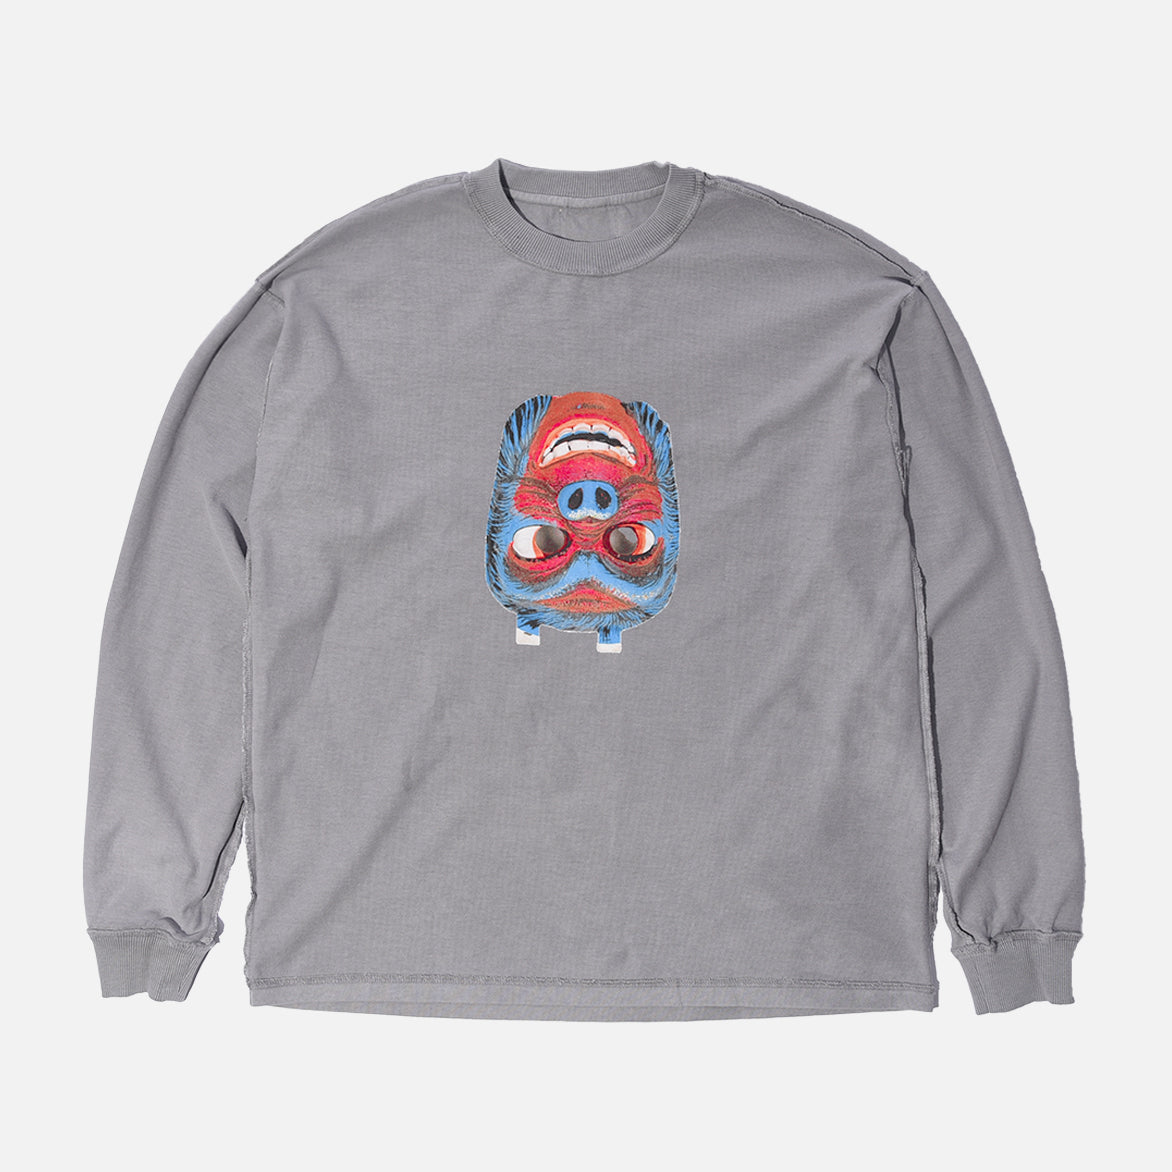 INVADER GLIM LONG SLEEVE - MINERAL